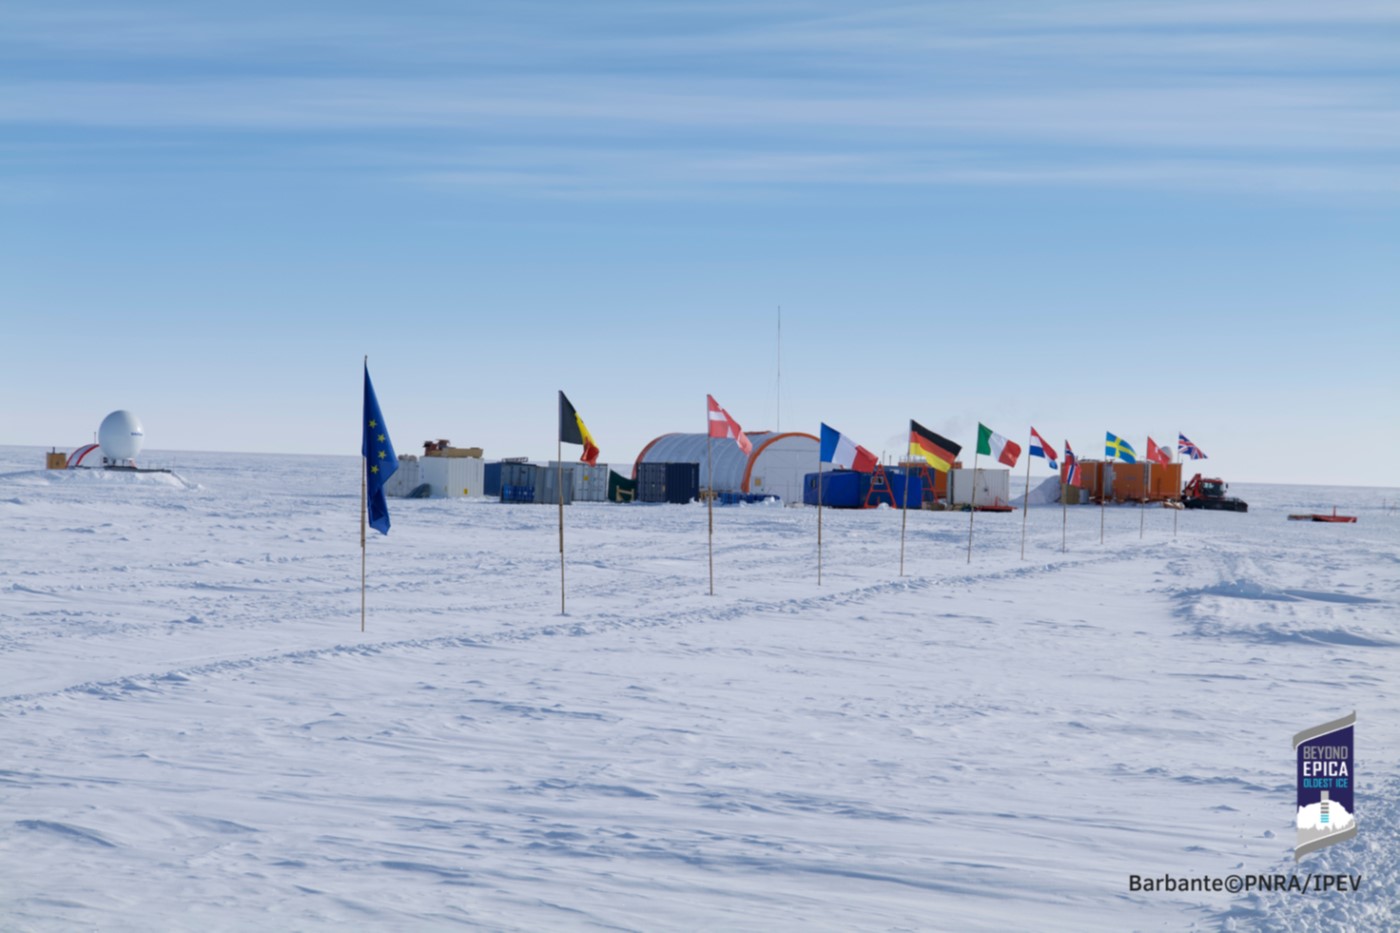 A view of the Camp from the road to Concordia. The picture is from the 2021/22 archive